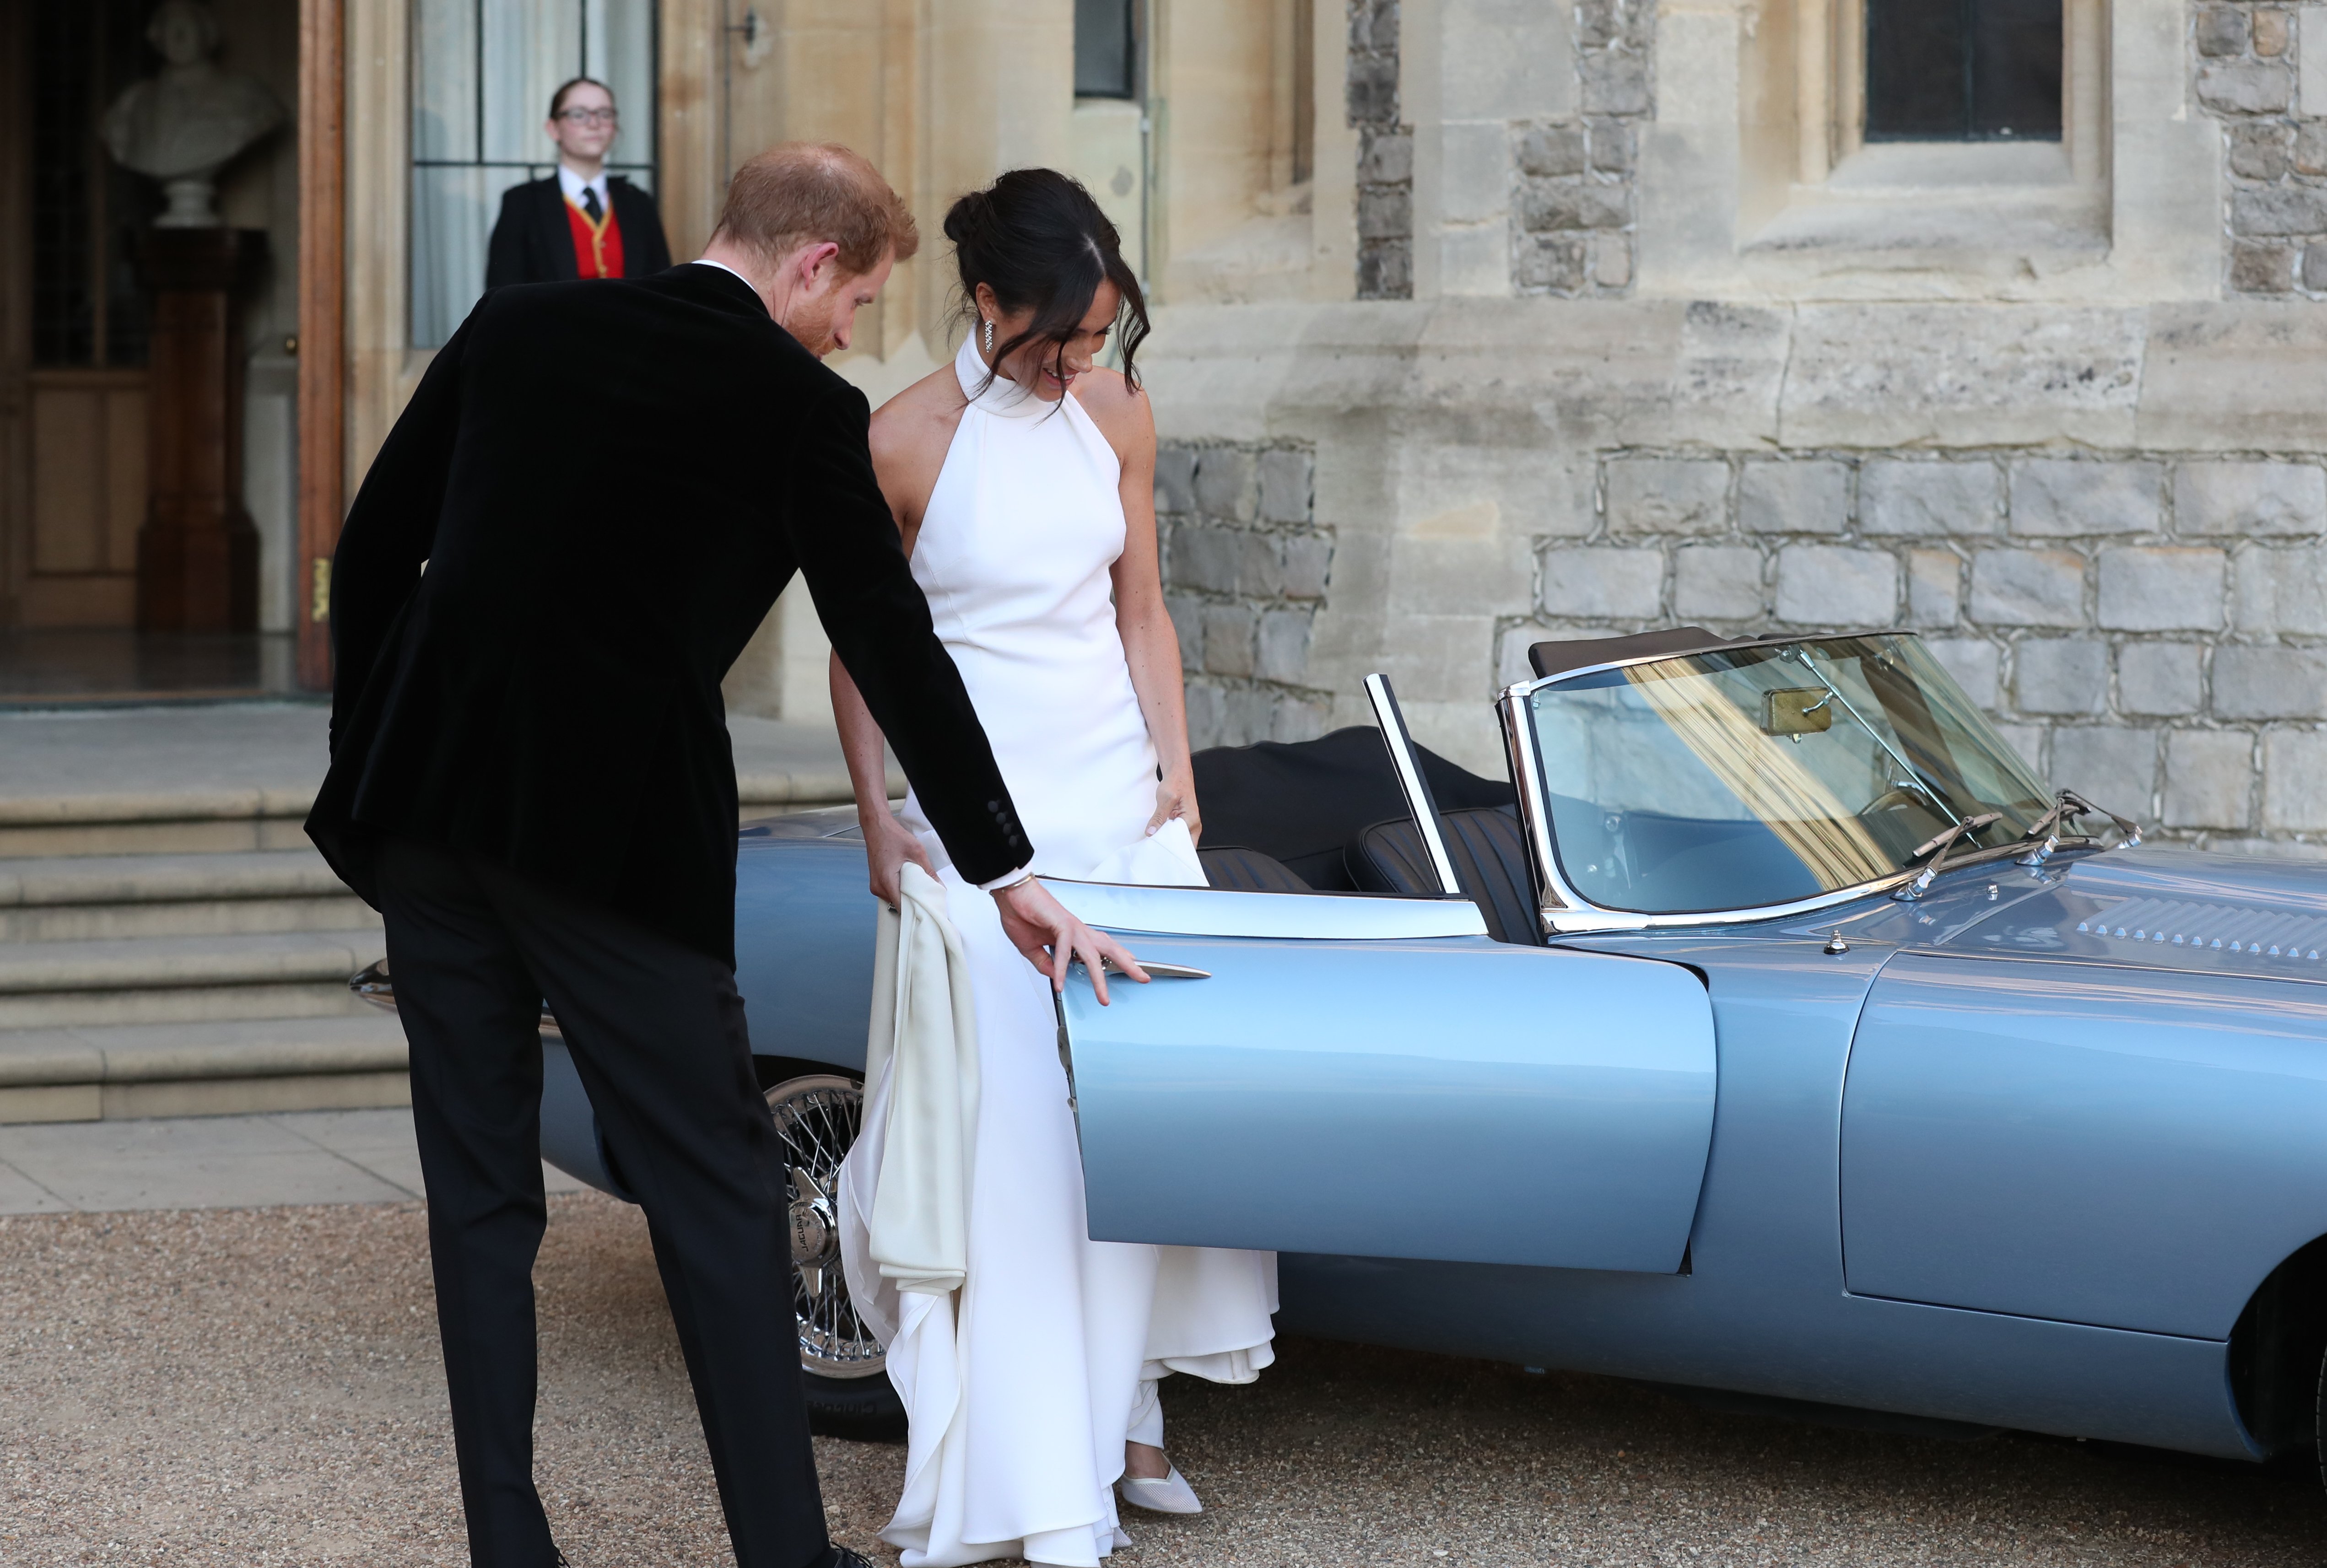 Prince Harry and Meghan Markle leaving for their evening wedding reception at Frogmore House on May 19, 2018 in Windsor, England. | Source: Getty Images 